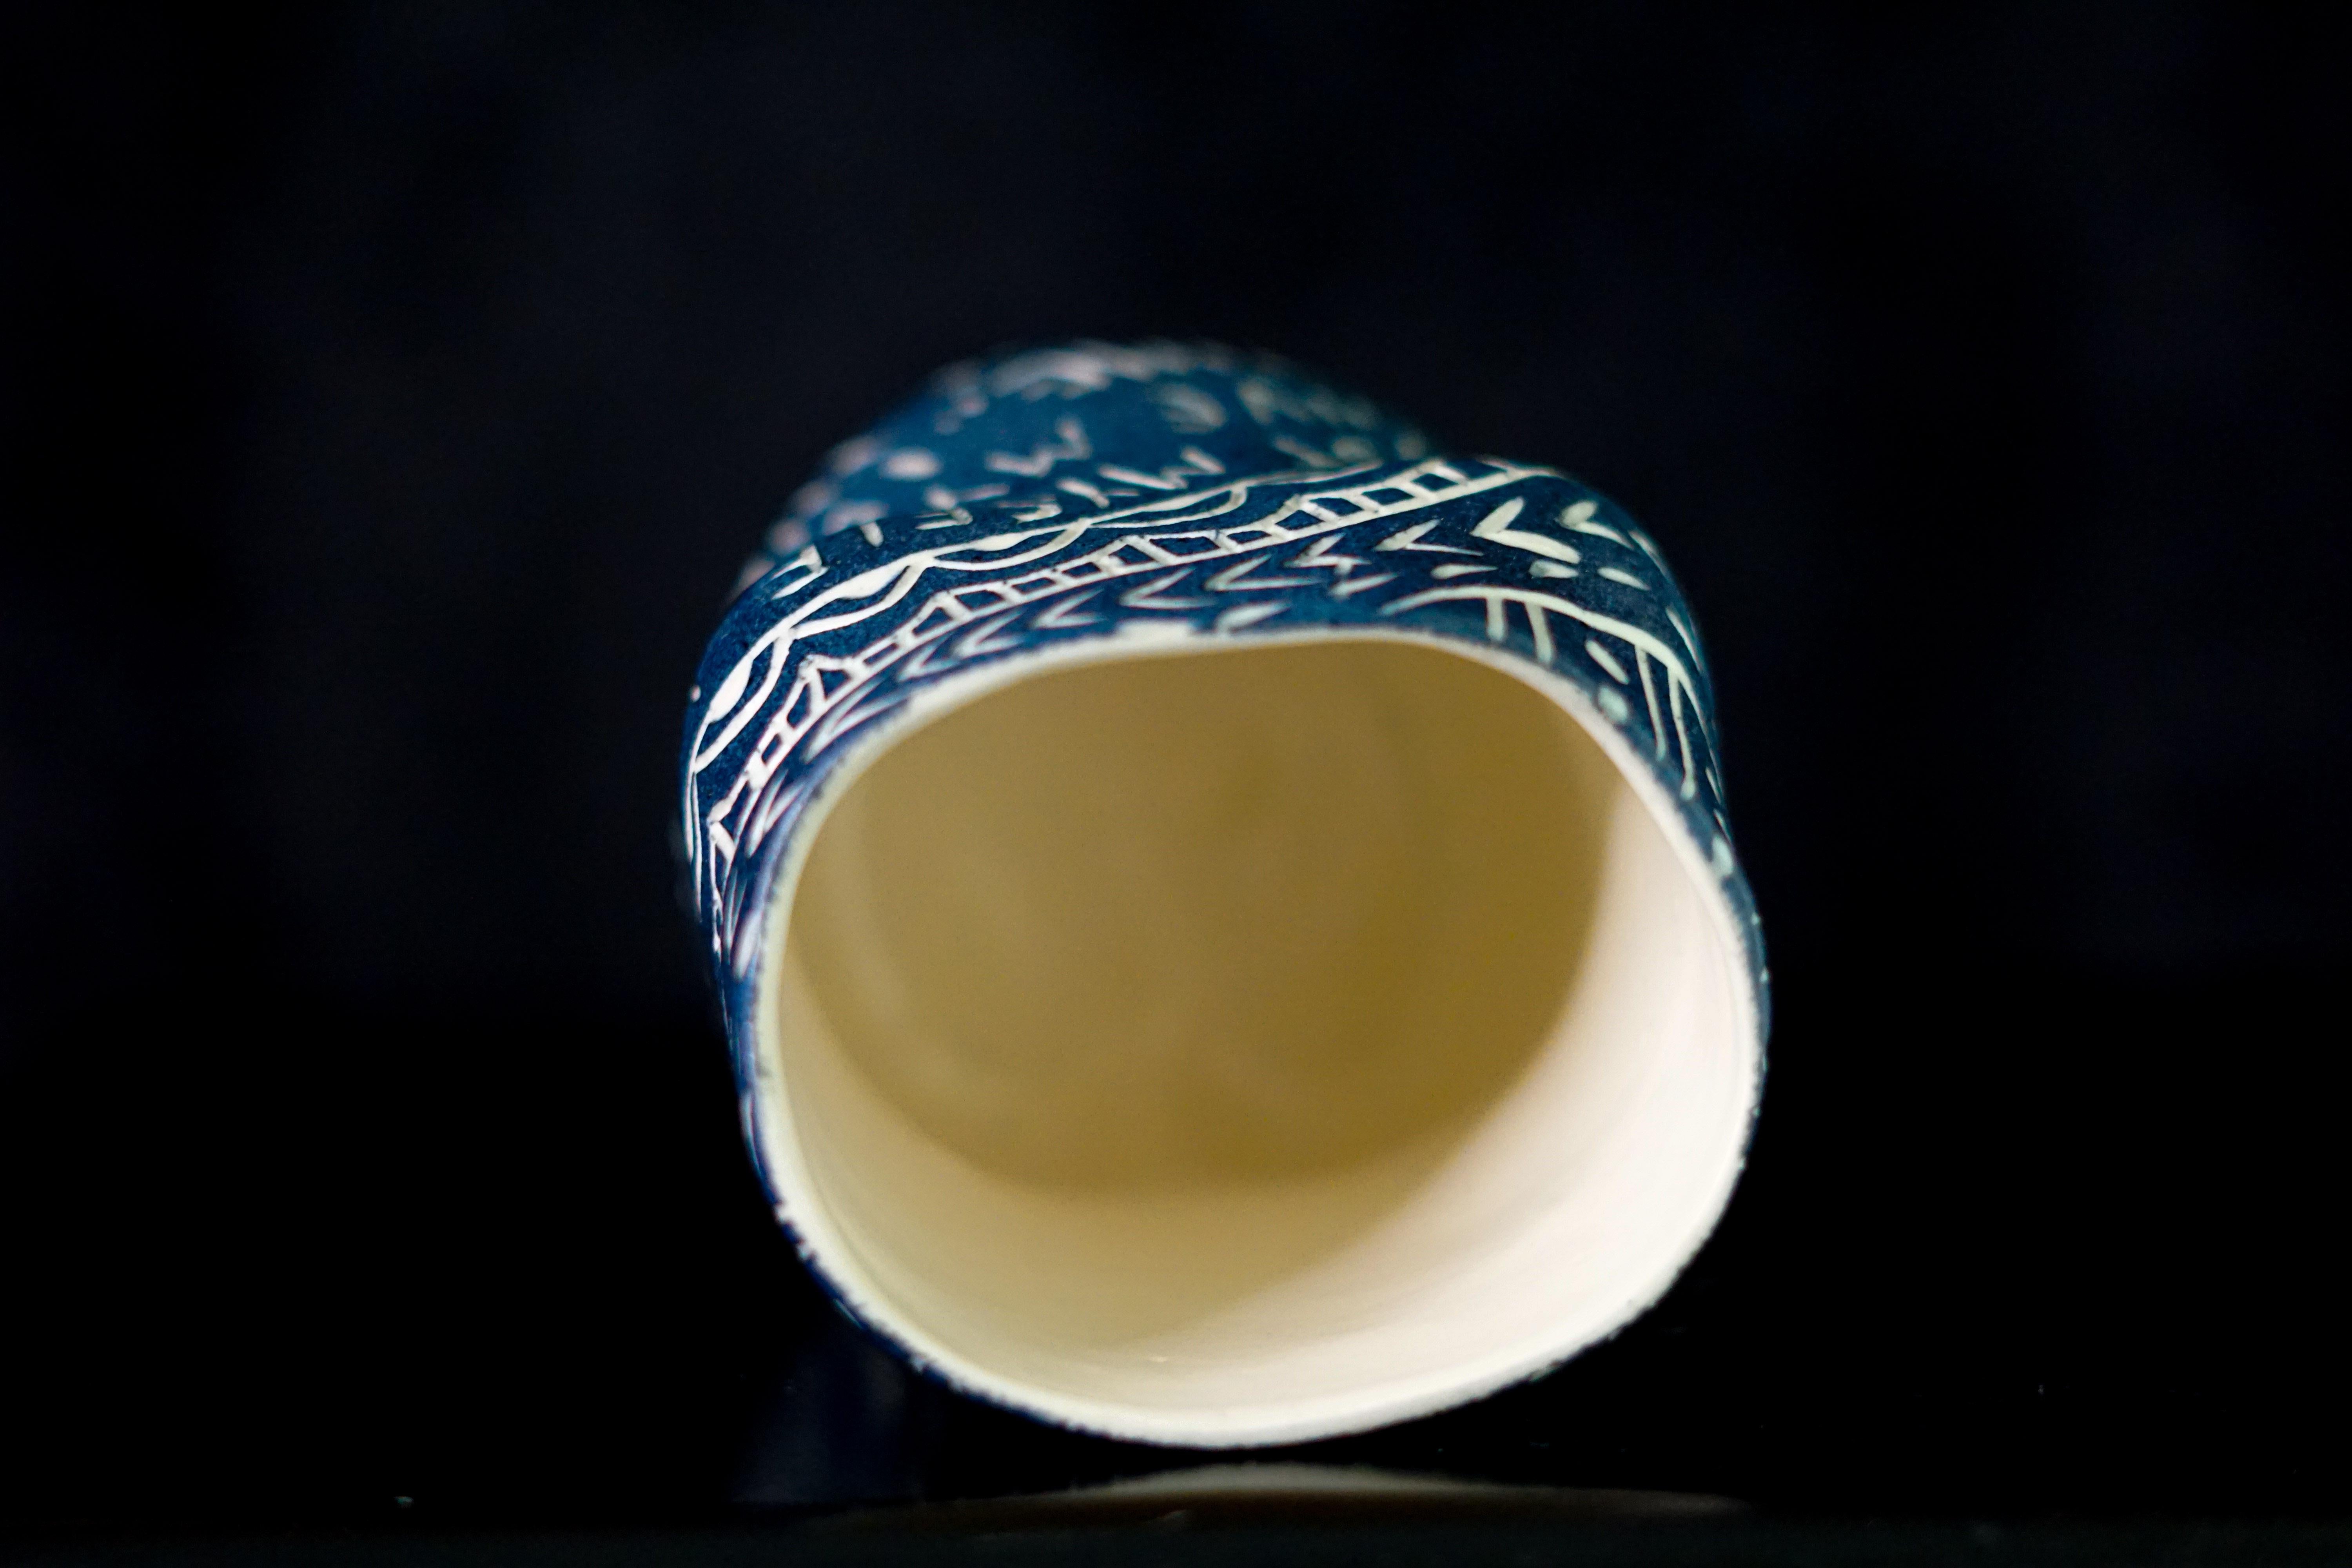 I lost myself..., Porcelain Cup with Sgraffito Detailing - Modern Sculpture by Alex Hodge